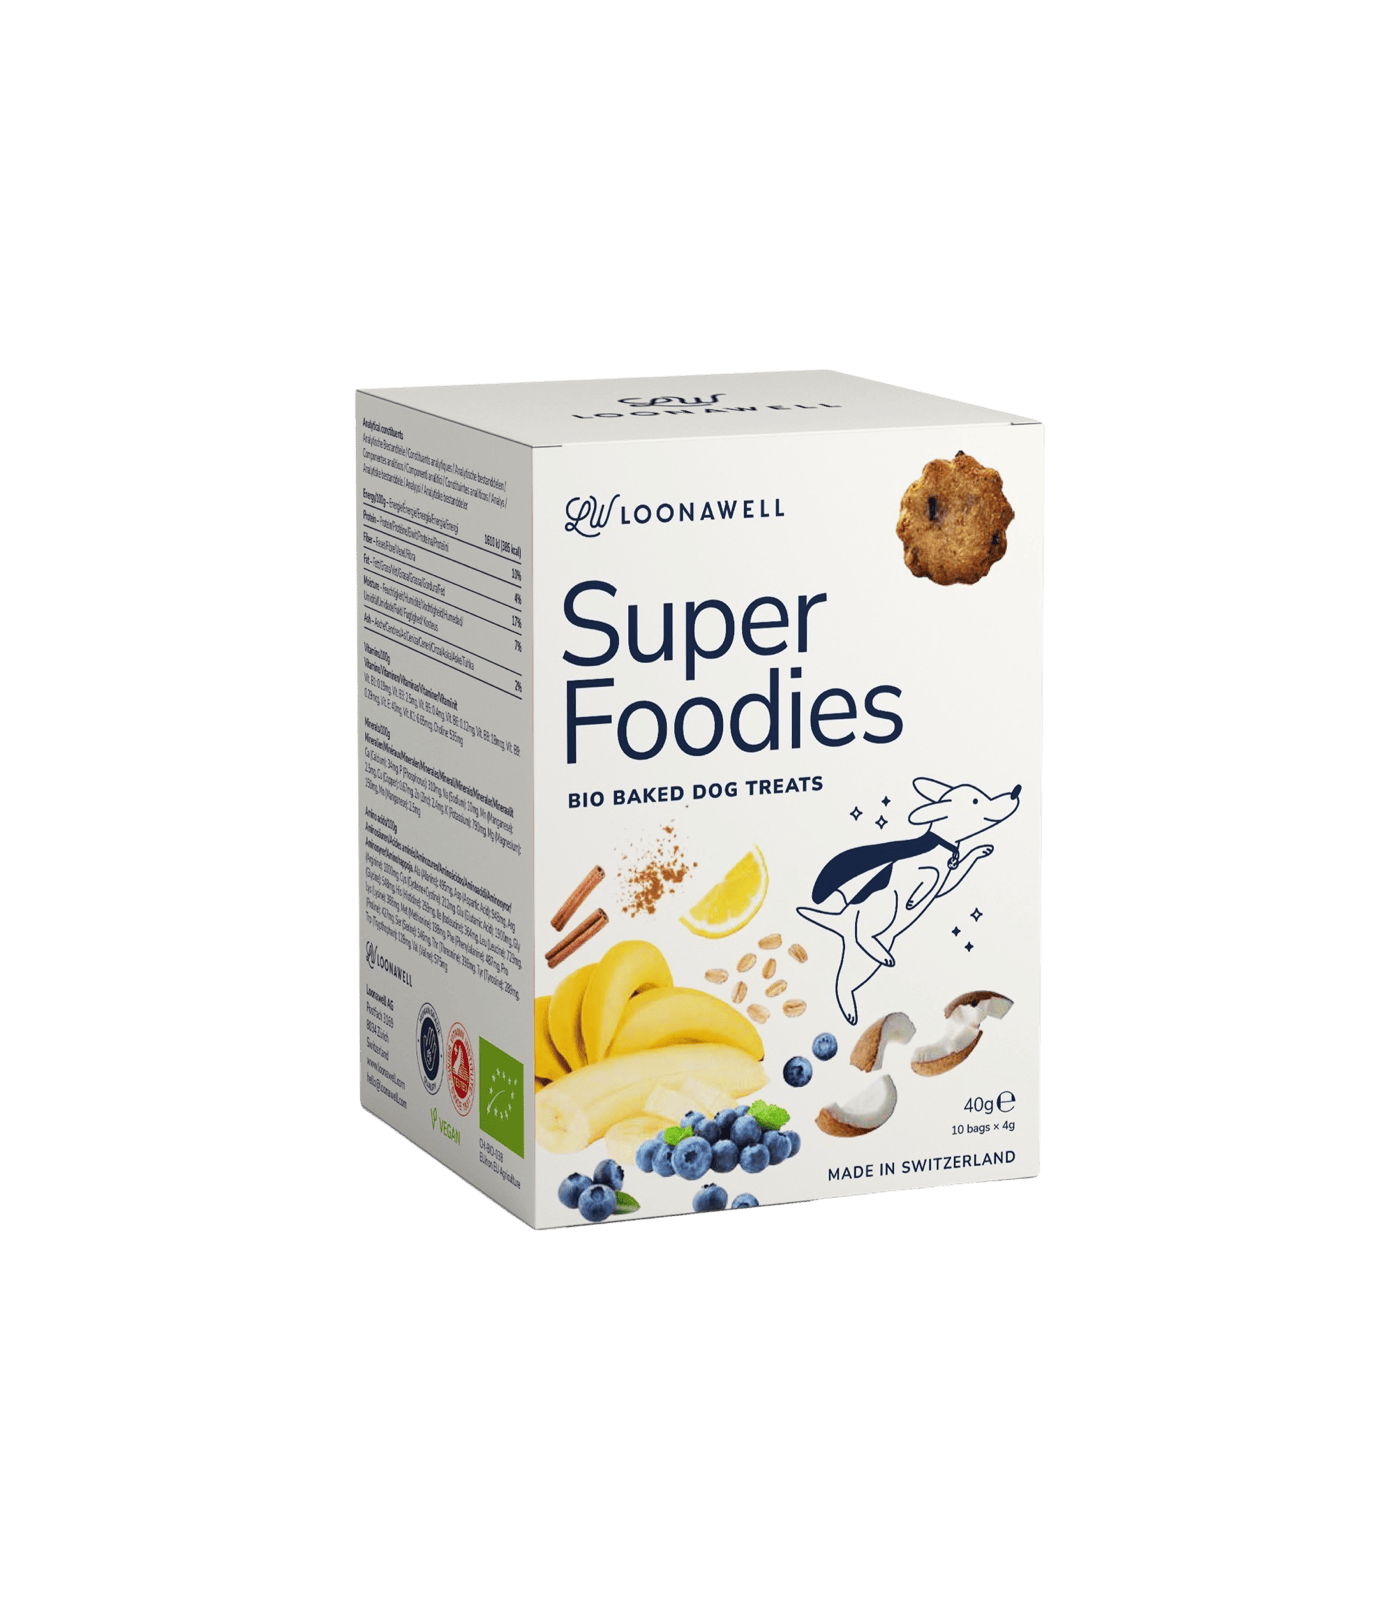 LOONAWELL Super Foodies organic dog treats. With antioxidants for a healthy dog immune system. Made in Switzerland, shipped worldwide. 